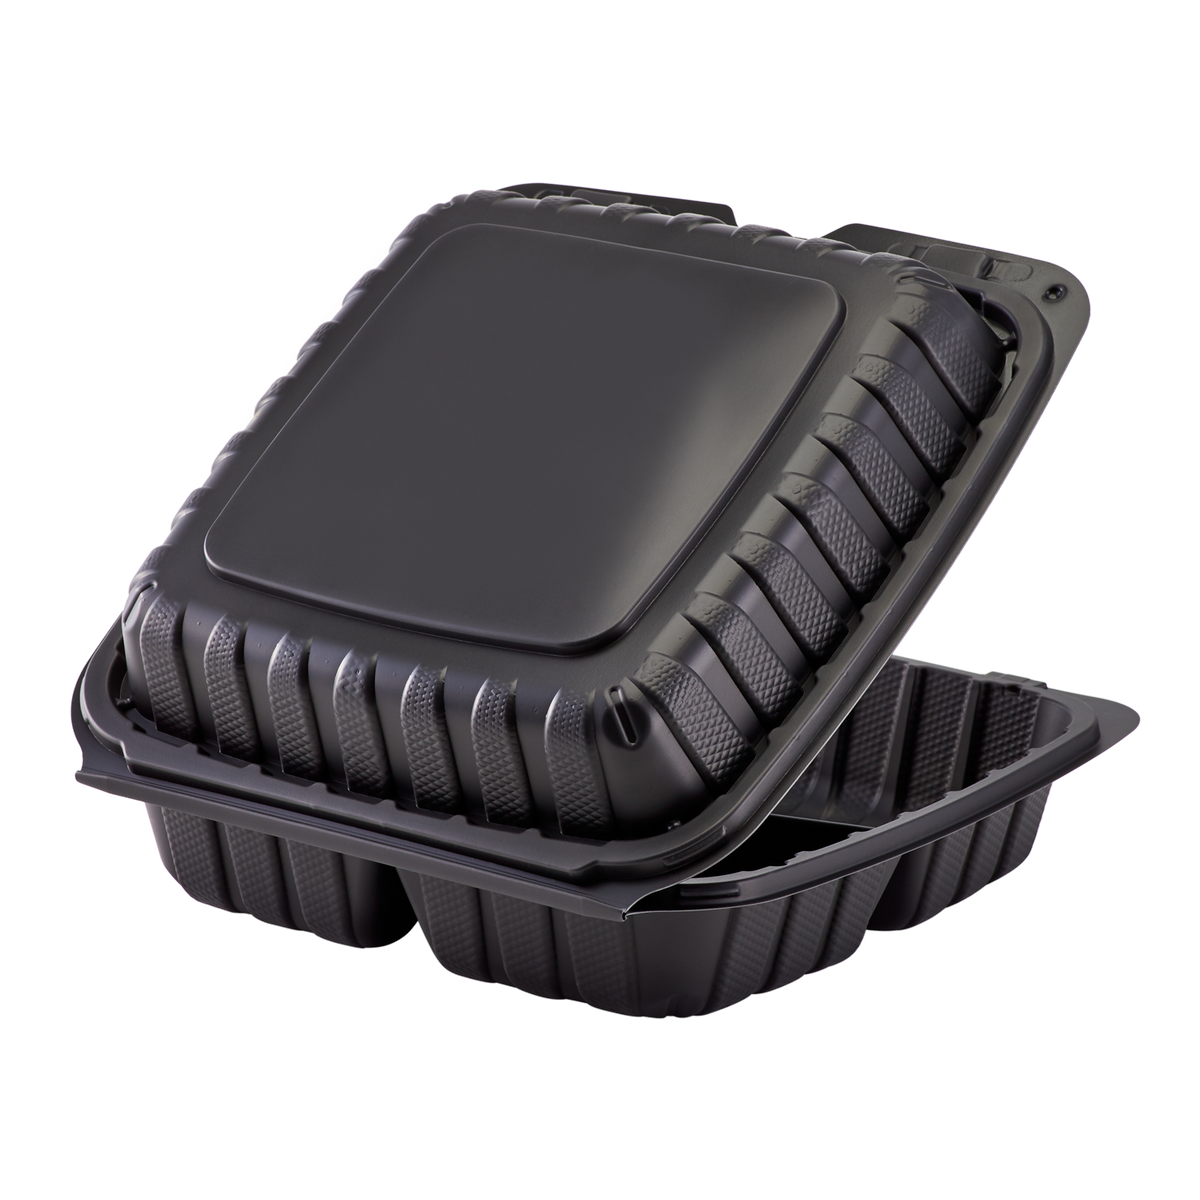 Wholesale 6 Pack 3 Compartment Round Food Container- 30oz BLACK